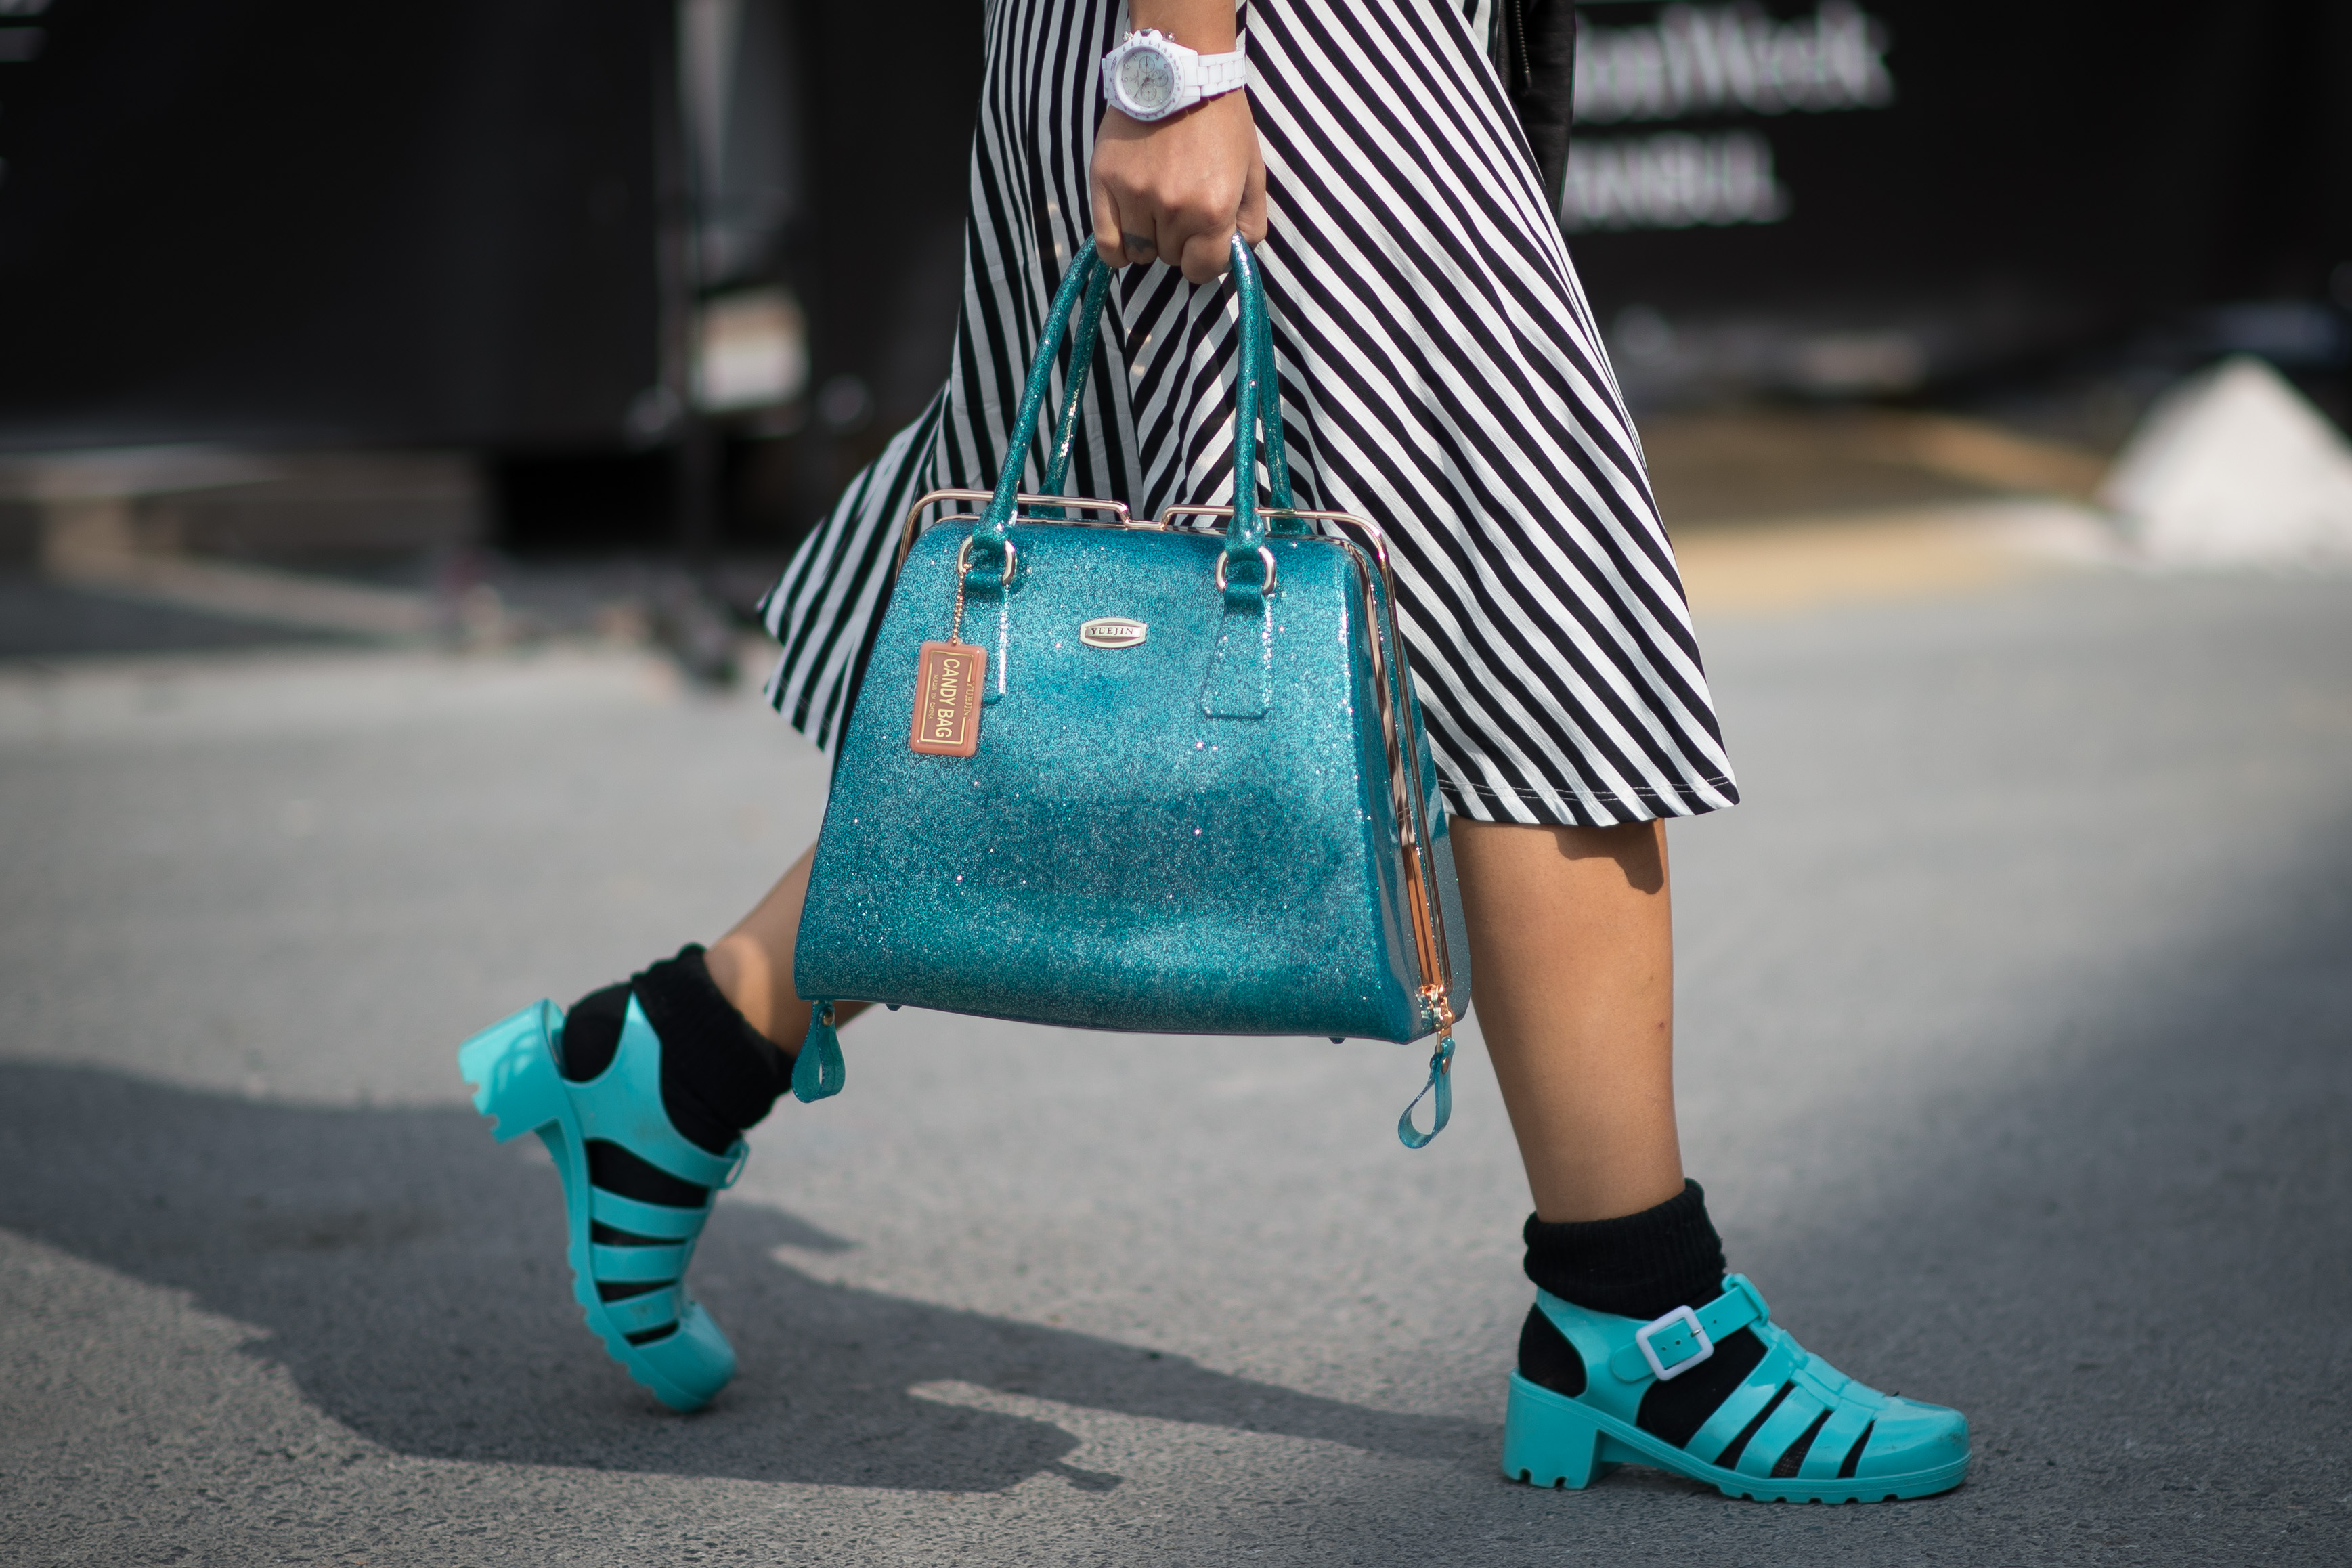 Rock the Socks and Sandal Trend